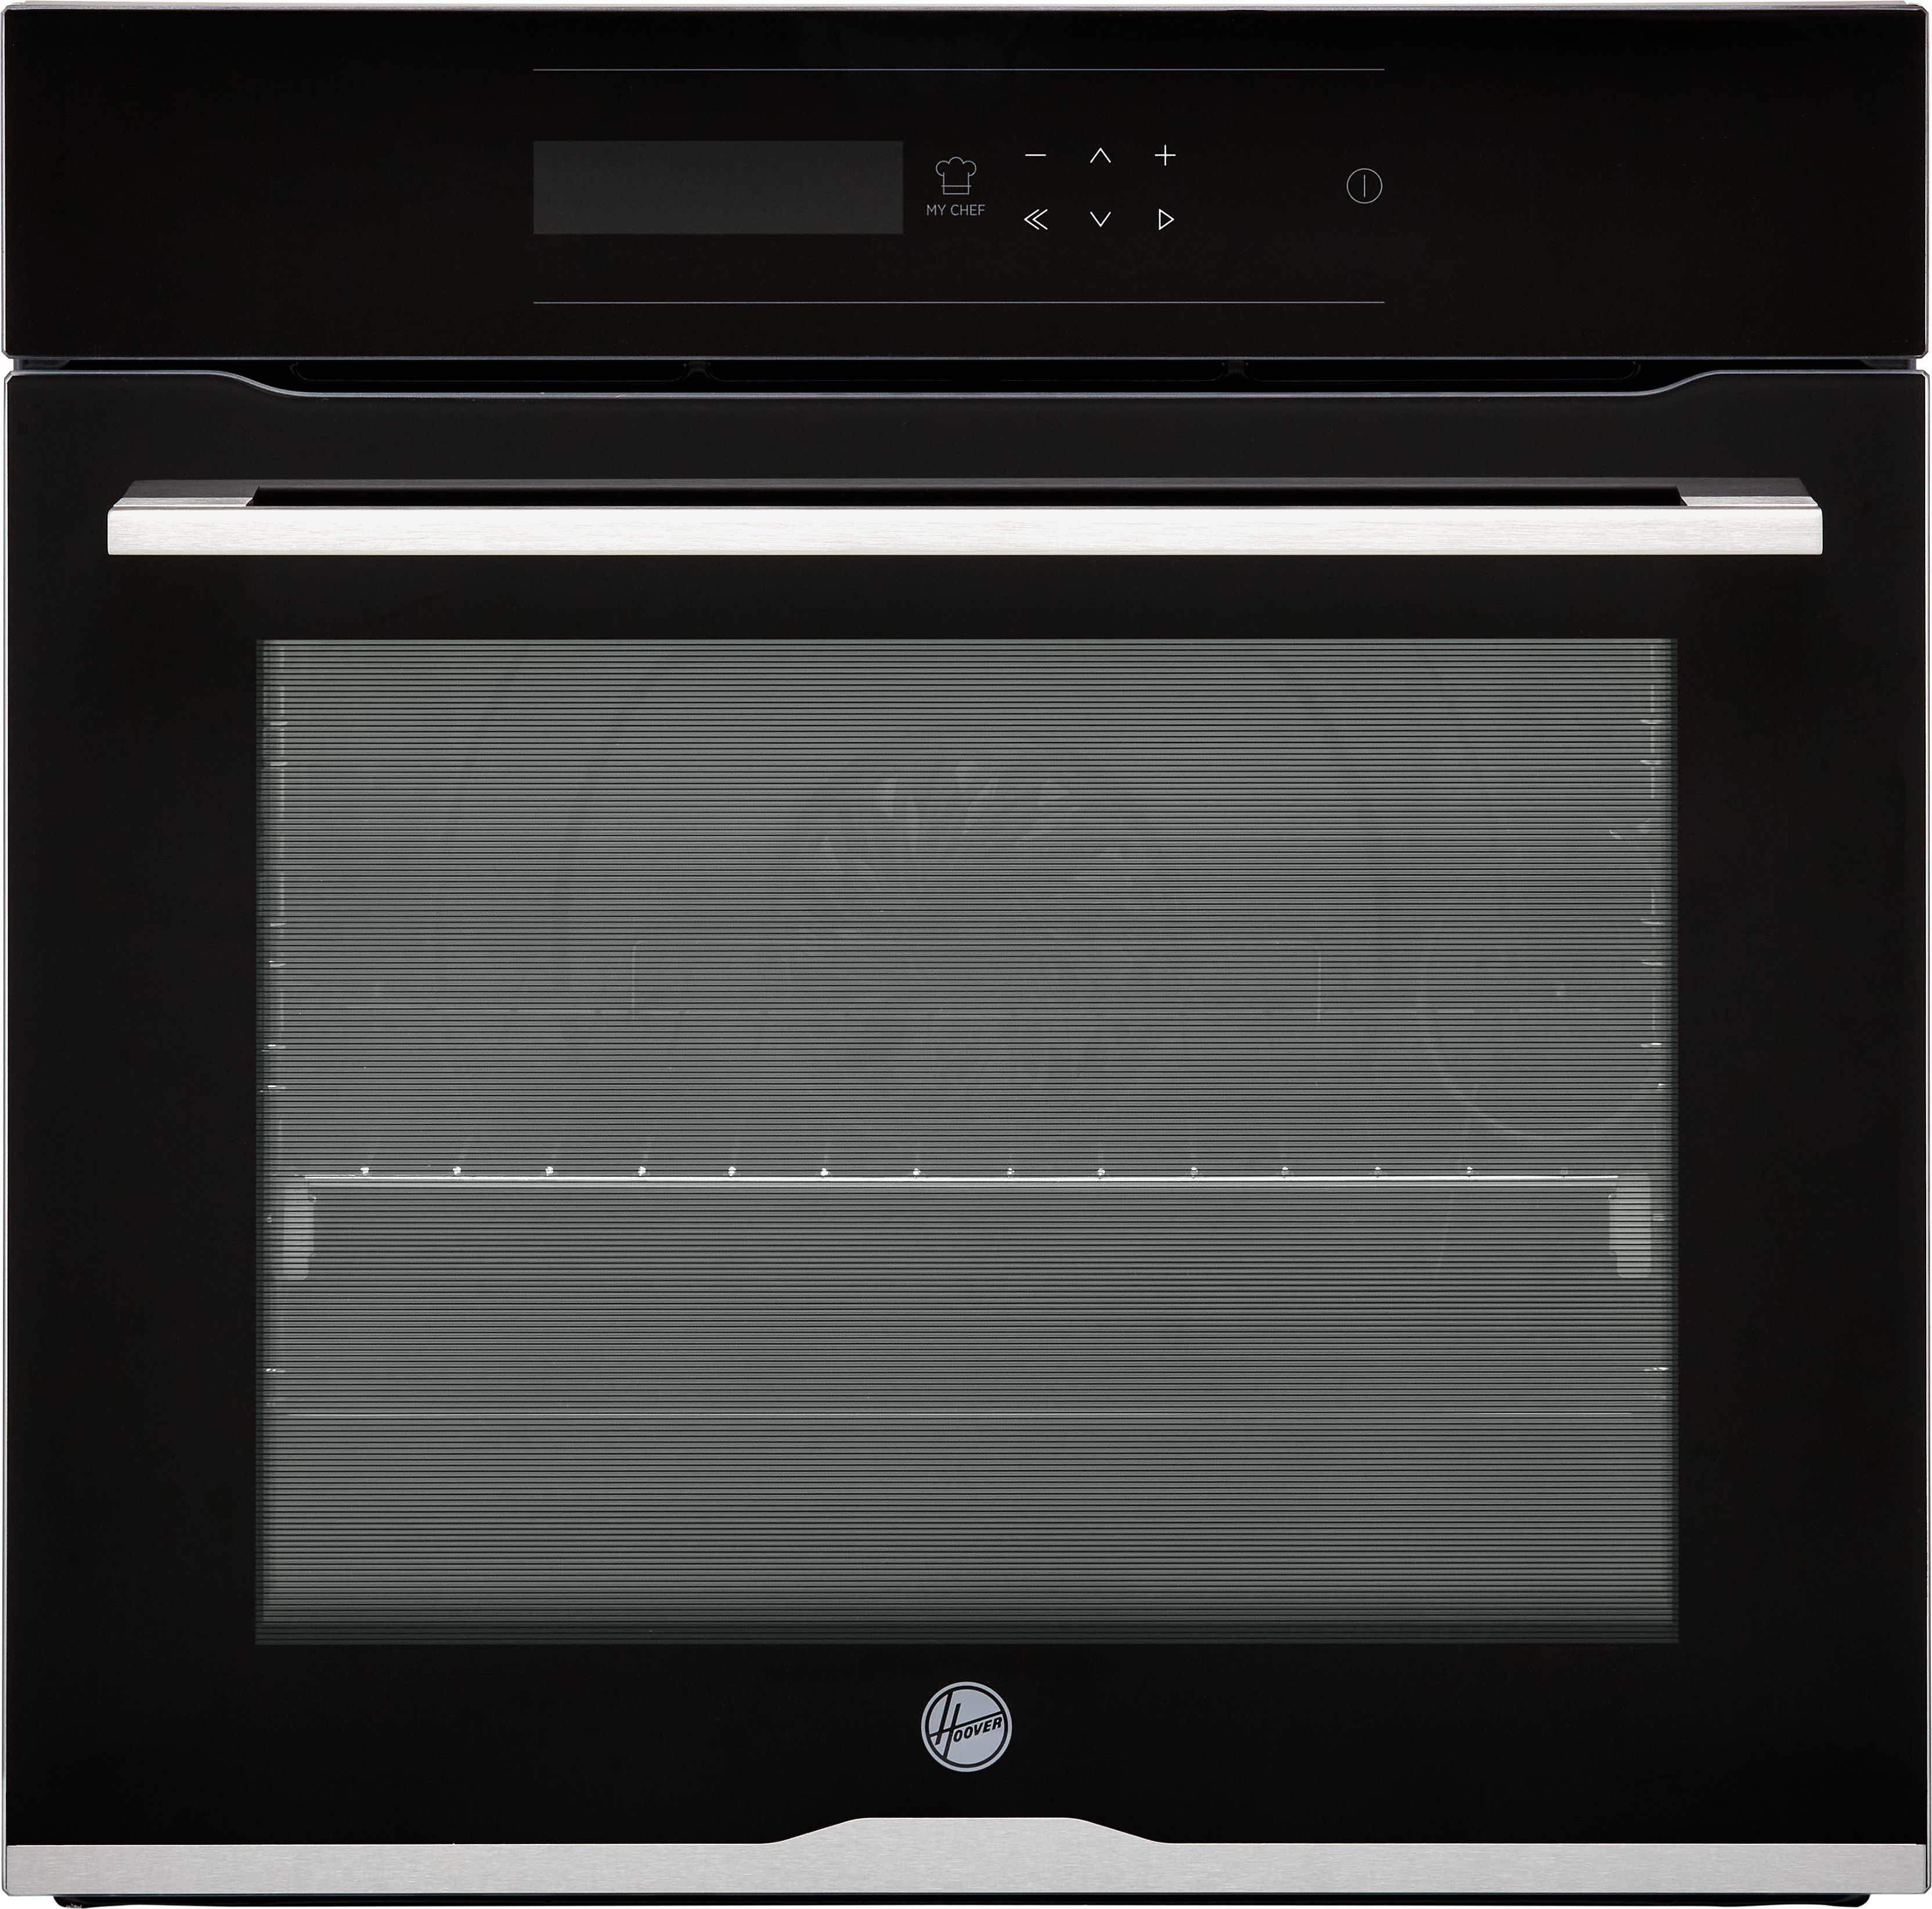 Hoover H-OVEN 500 HOC5S0978INPWF Wifi Connected Built In Electric Single Oven and Pyrolytic Cleaning - Black - A+ Rated, Black